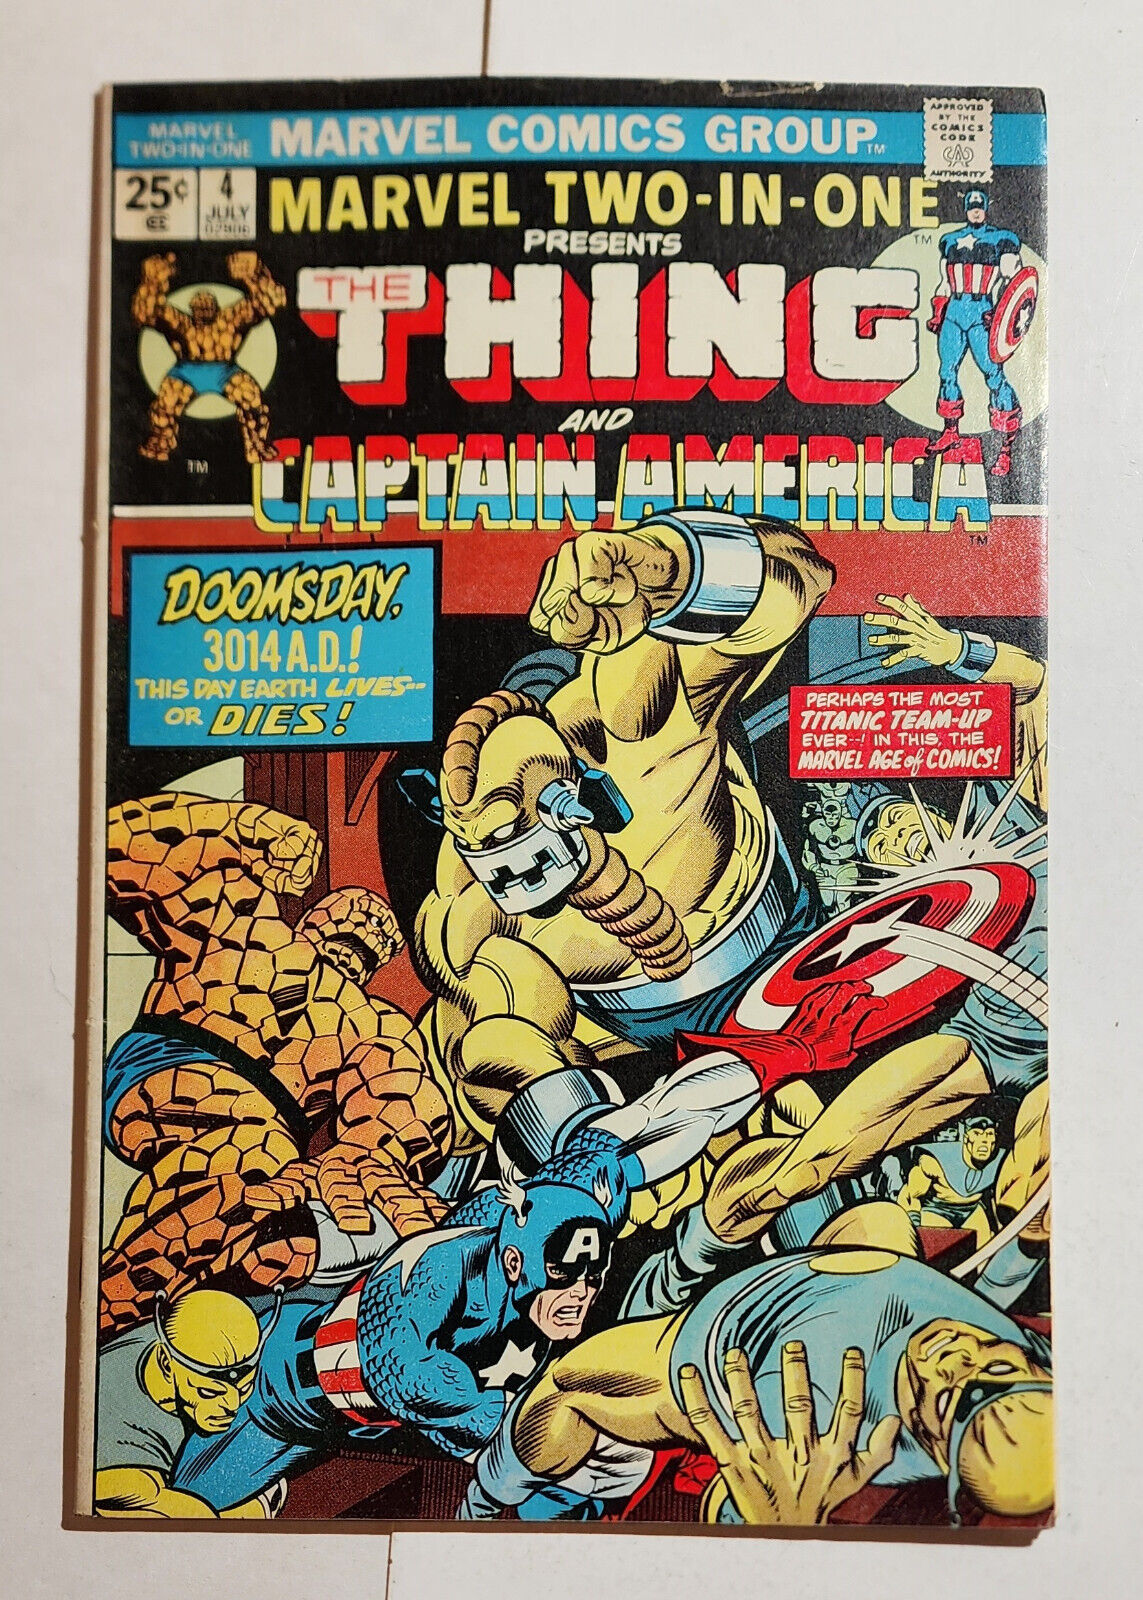 MARVEL TWO-IN-ONE #4, Thing & Captain America - I combine shipping